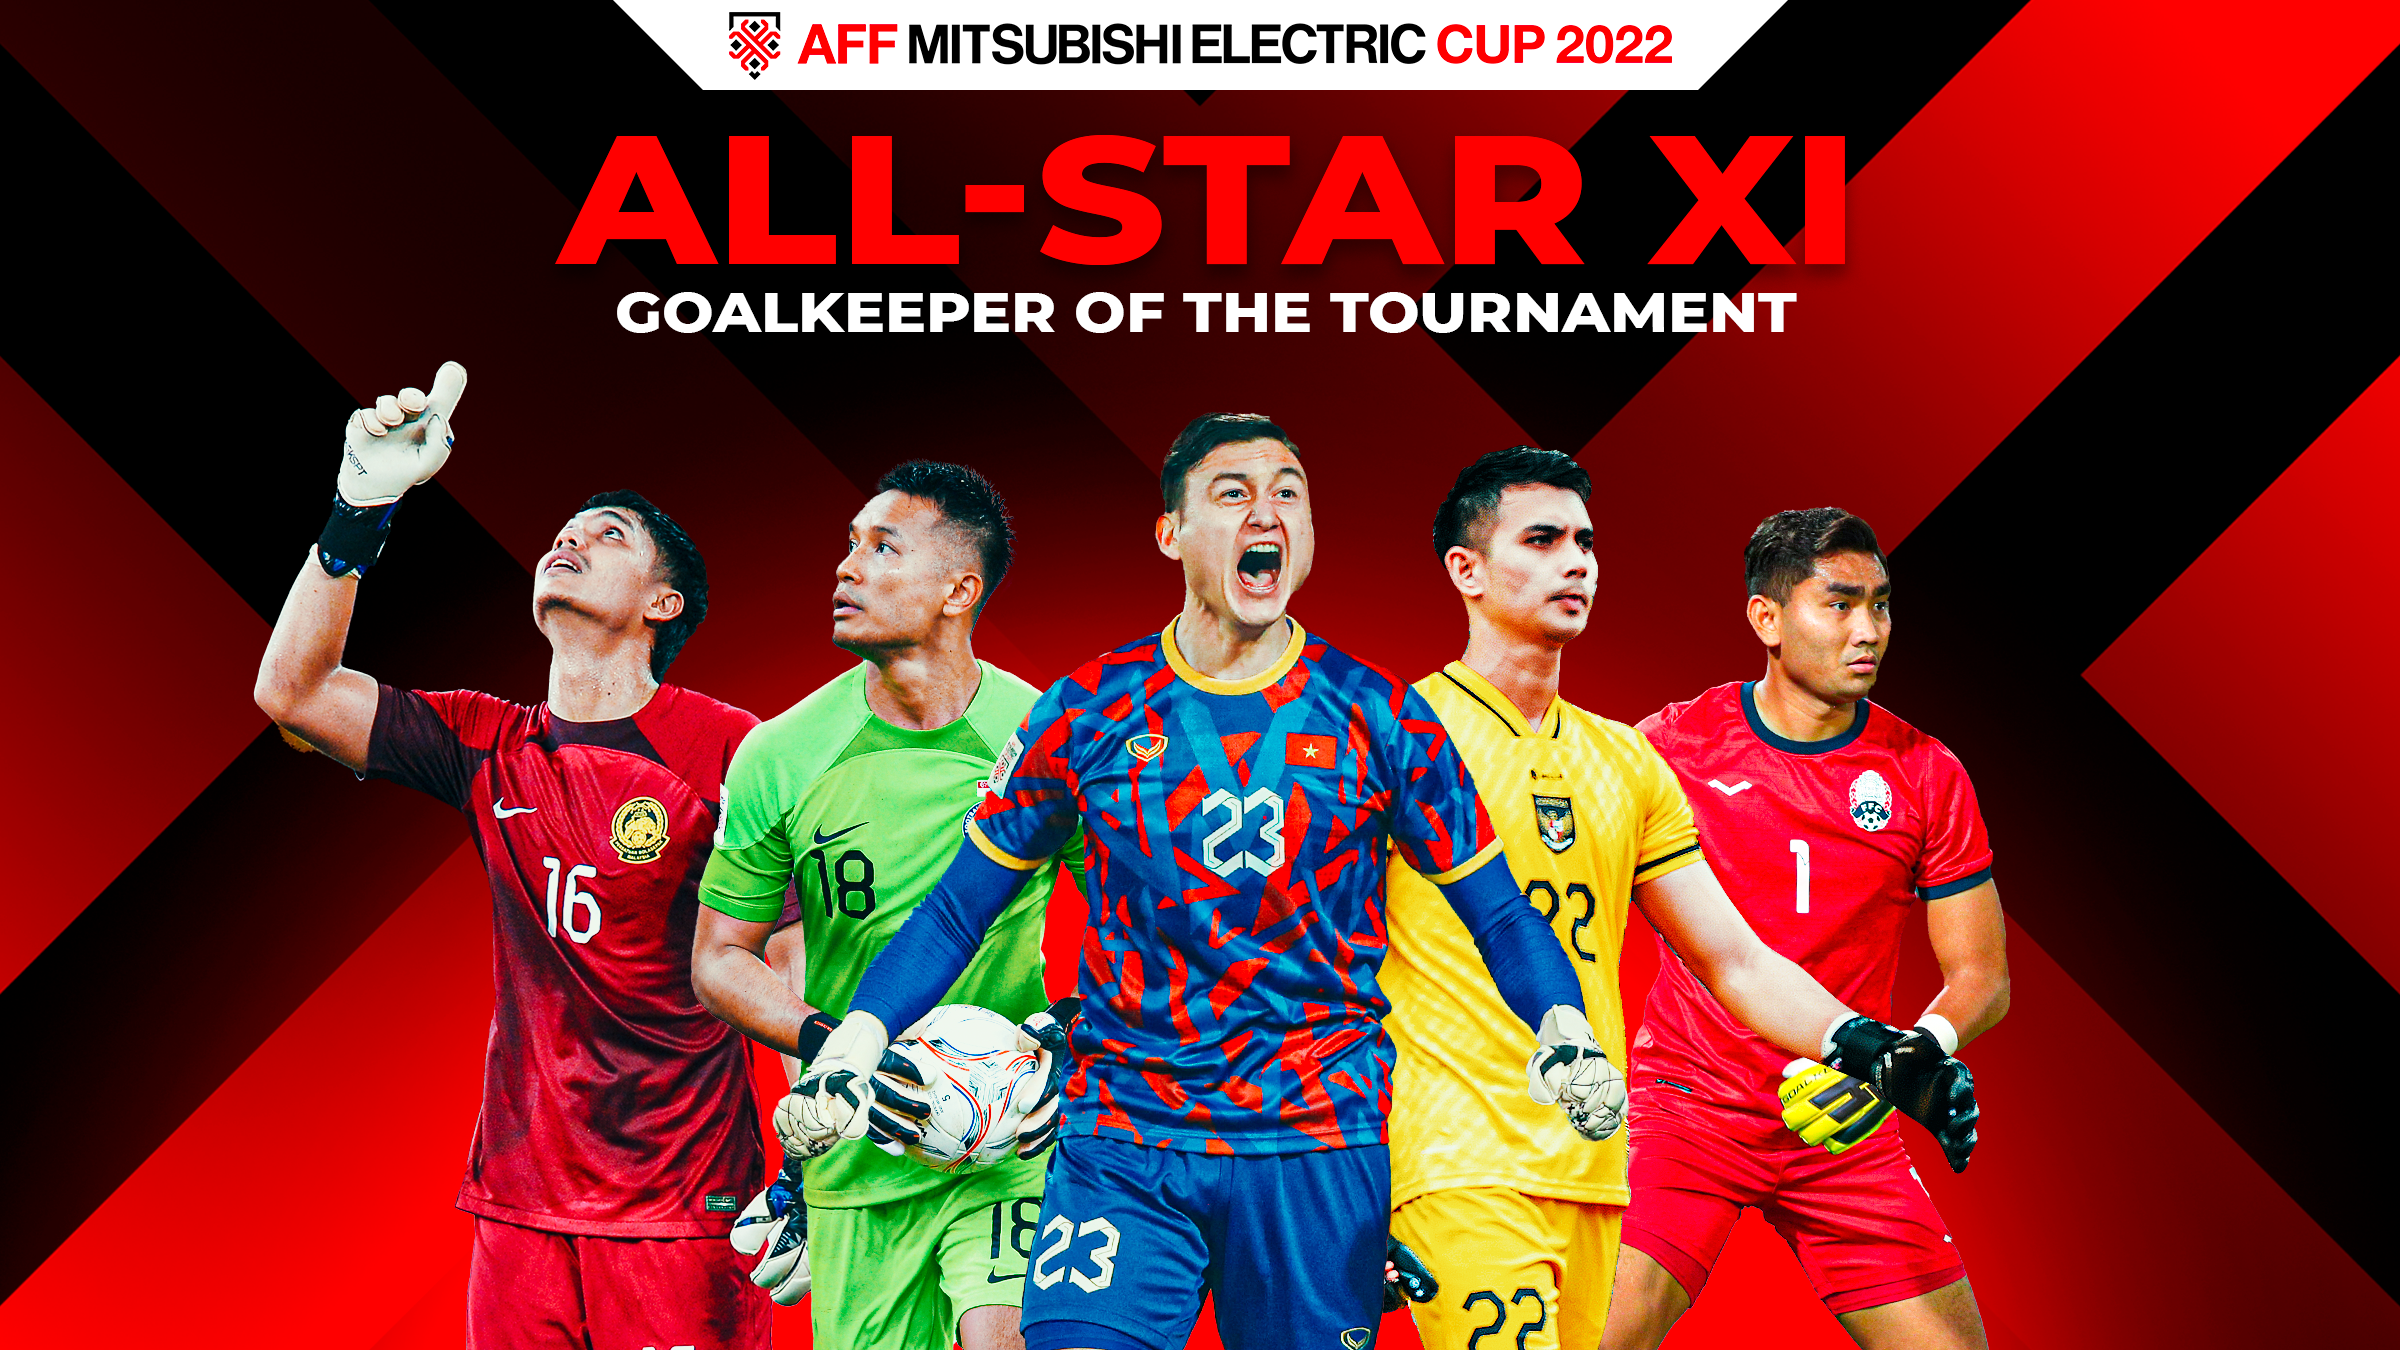 Vote For Your All-Star XI Goalkeeper Of The Tournament